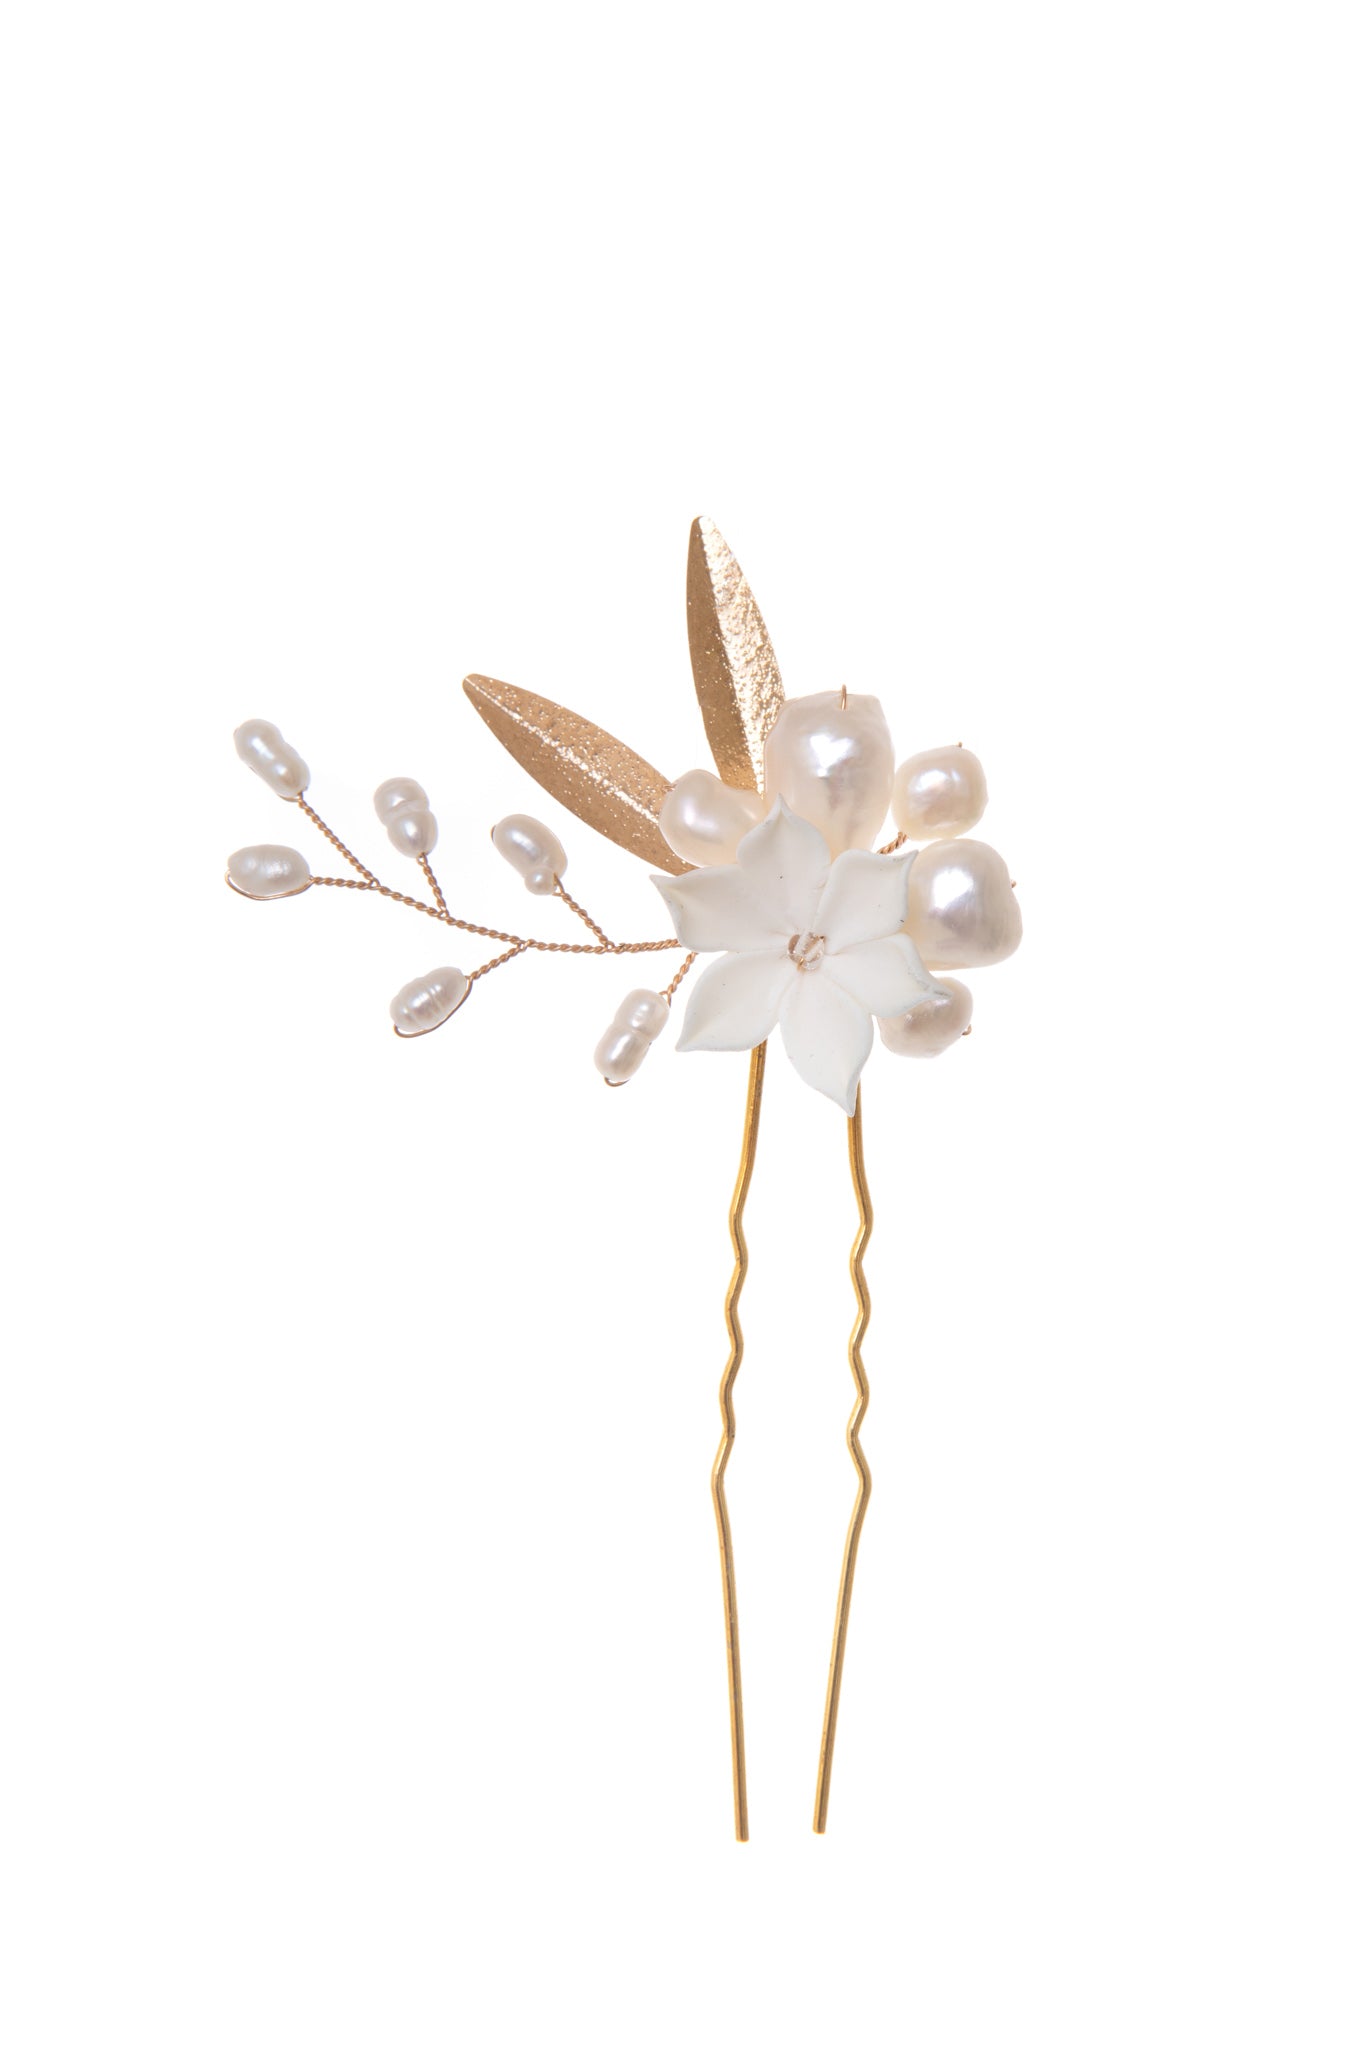 Bloom hair pin features freshwater pearls radiating out from a central flower to create an elegant, eye-catching piece.